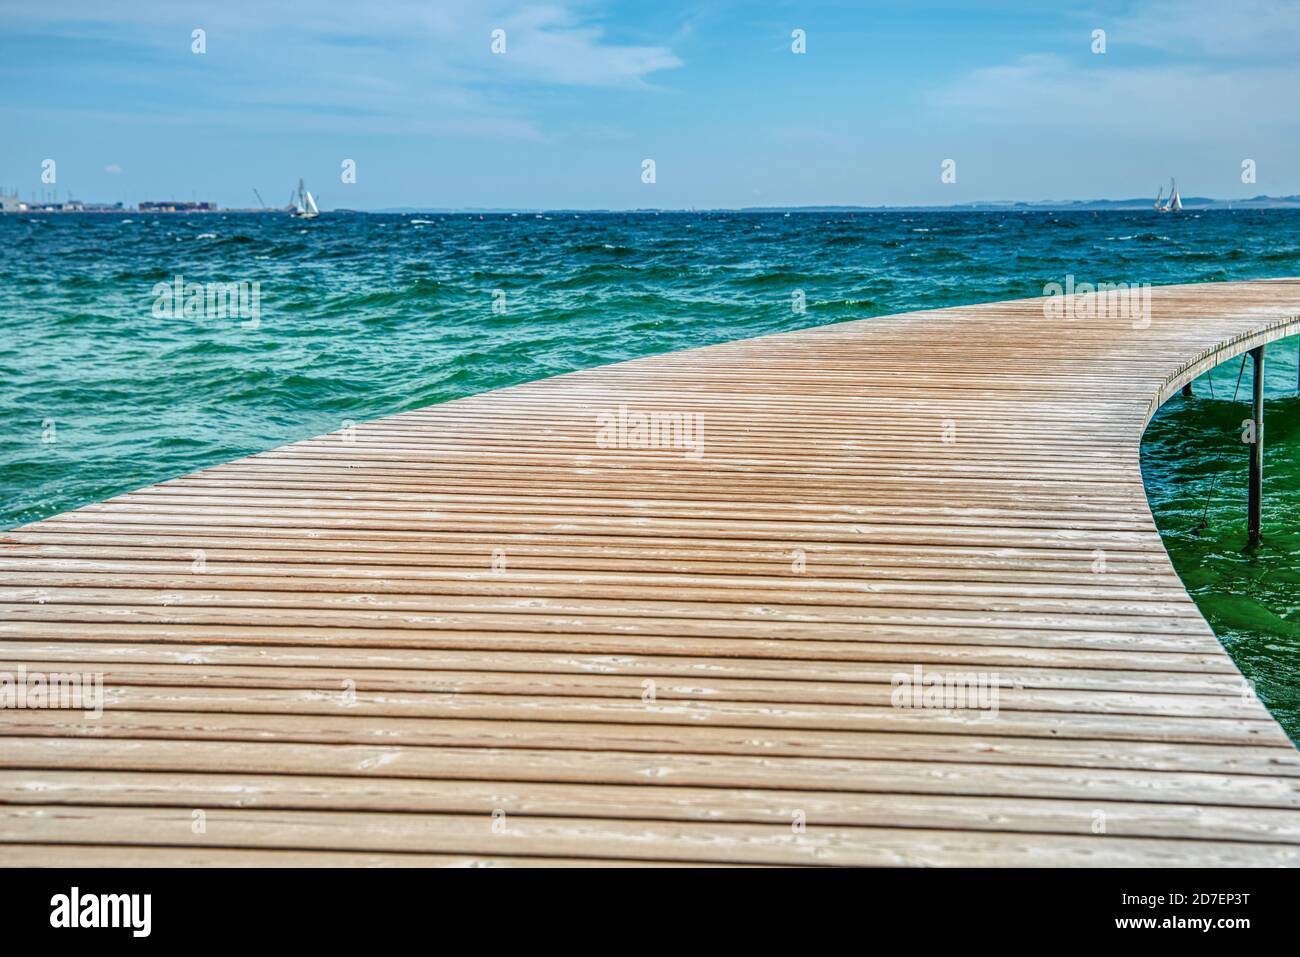 Den Uendelige Bro or Infinite Bridge is a circular jetty, pier or wooden round wharf that allows people to walk on the calm Baltic Sea in circles Stock Photo